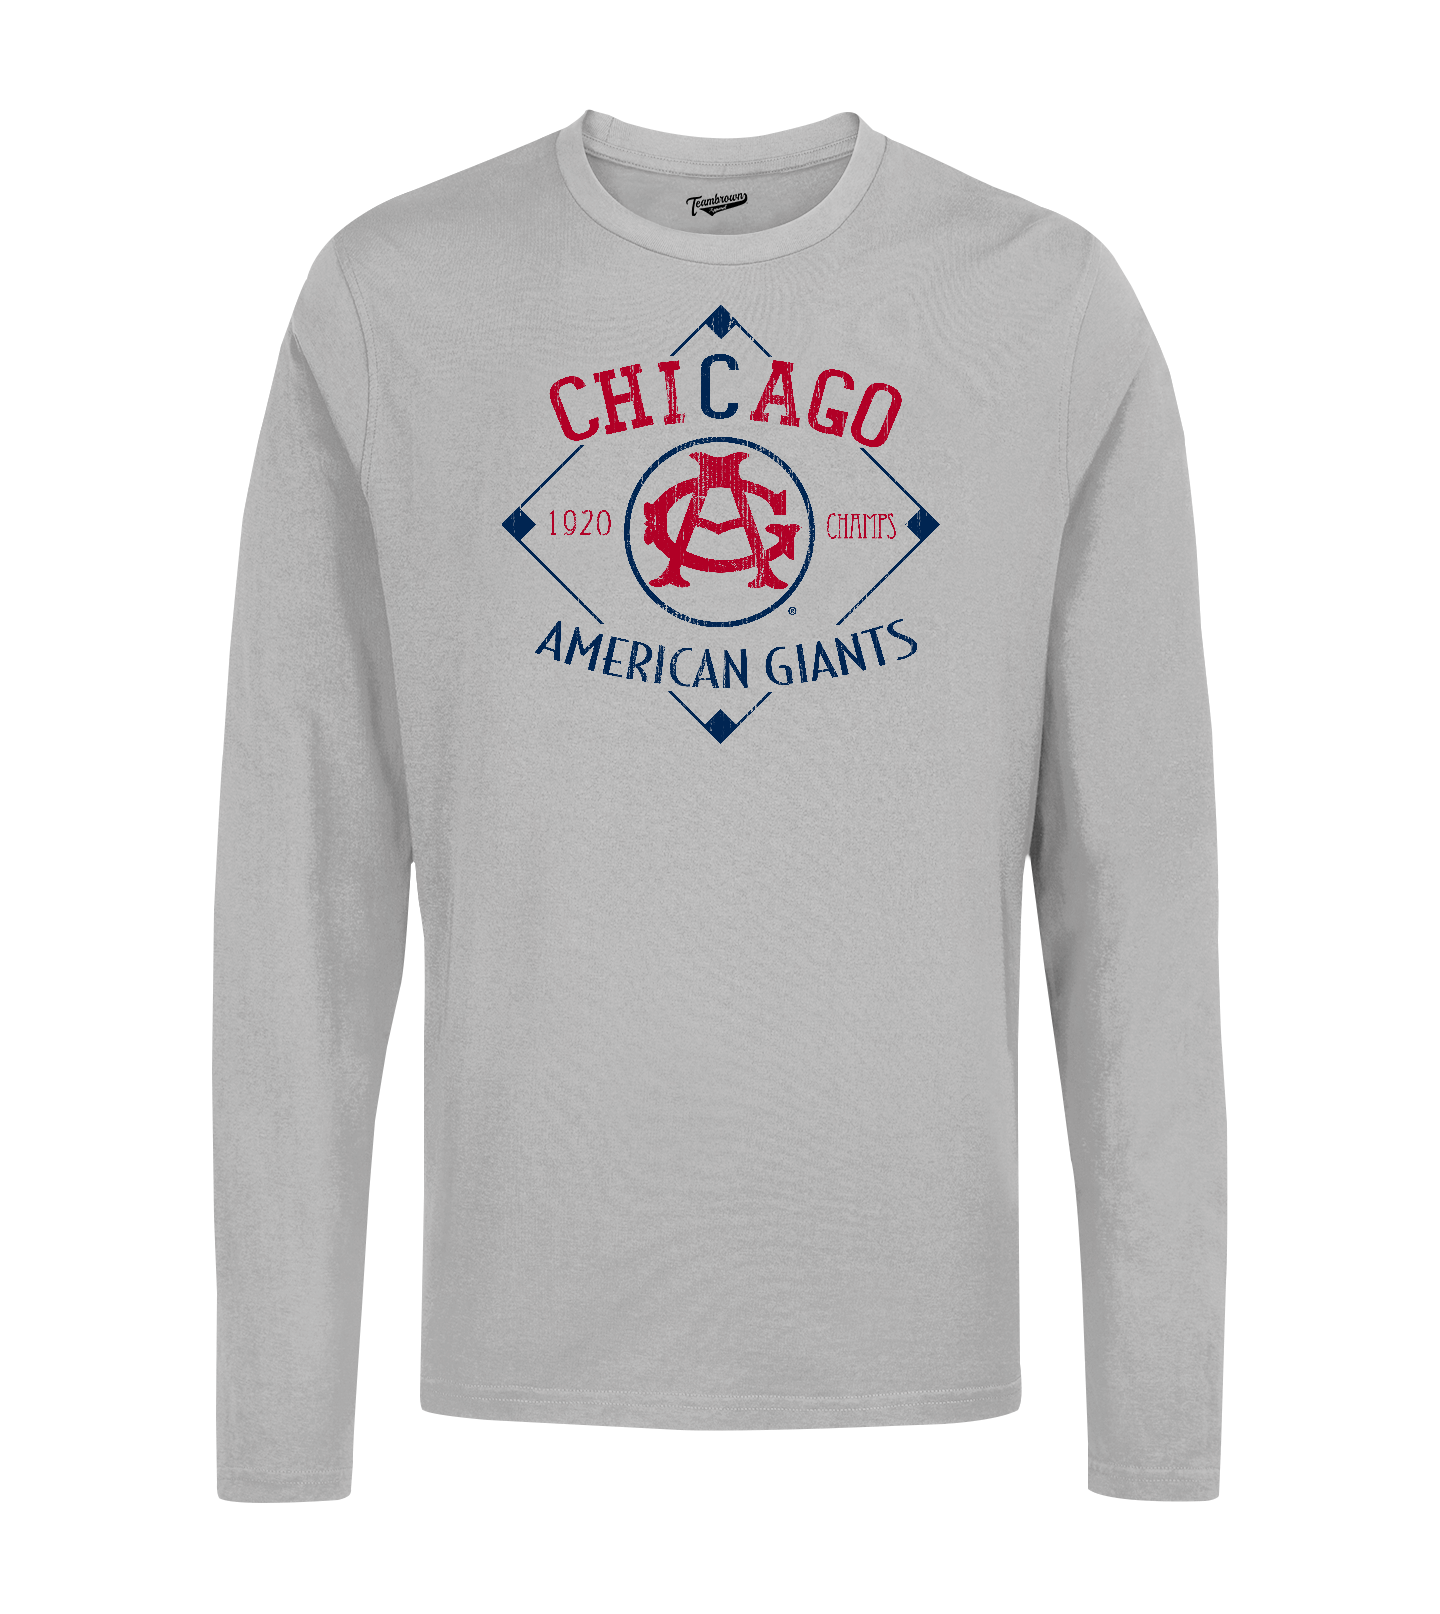 Unisex Teambrown Chicago American Giants Champions Collection Longsleeve  Baseball Shirt